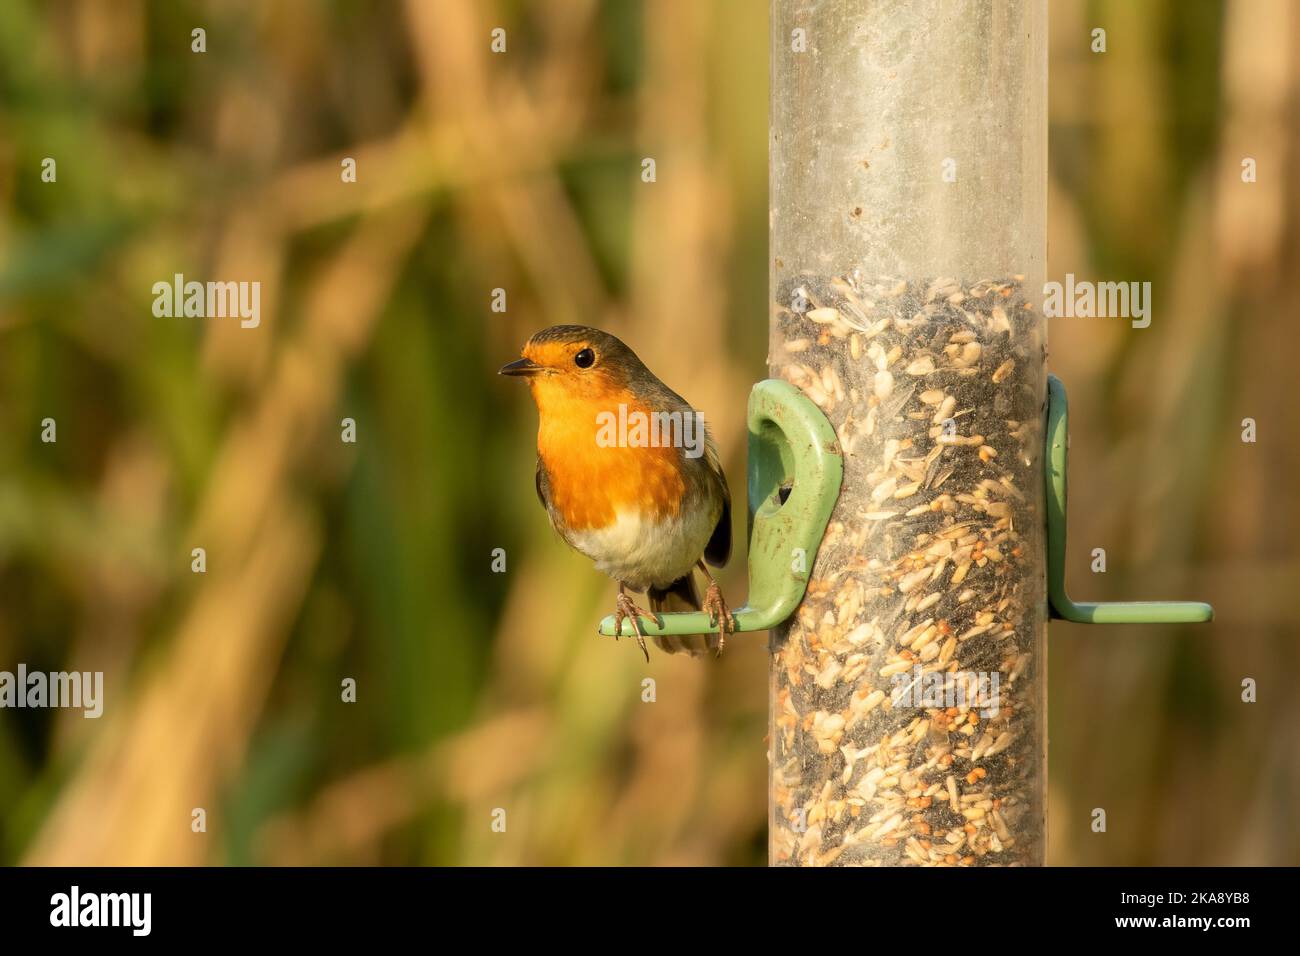 Robin redbreast, Erithacus rubecula, perched on bird feeder with mixed seed against blurred garden background Stock Photo